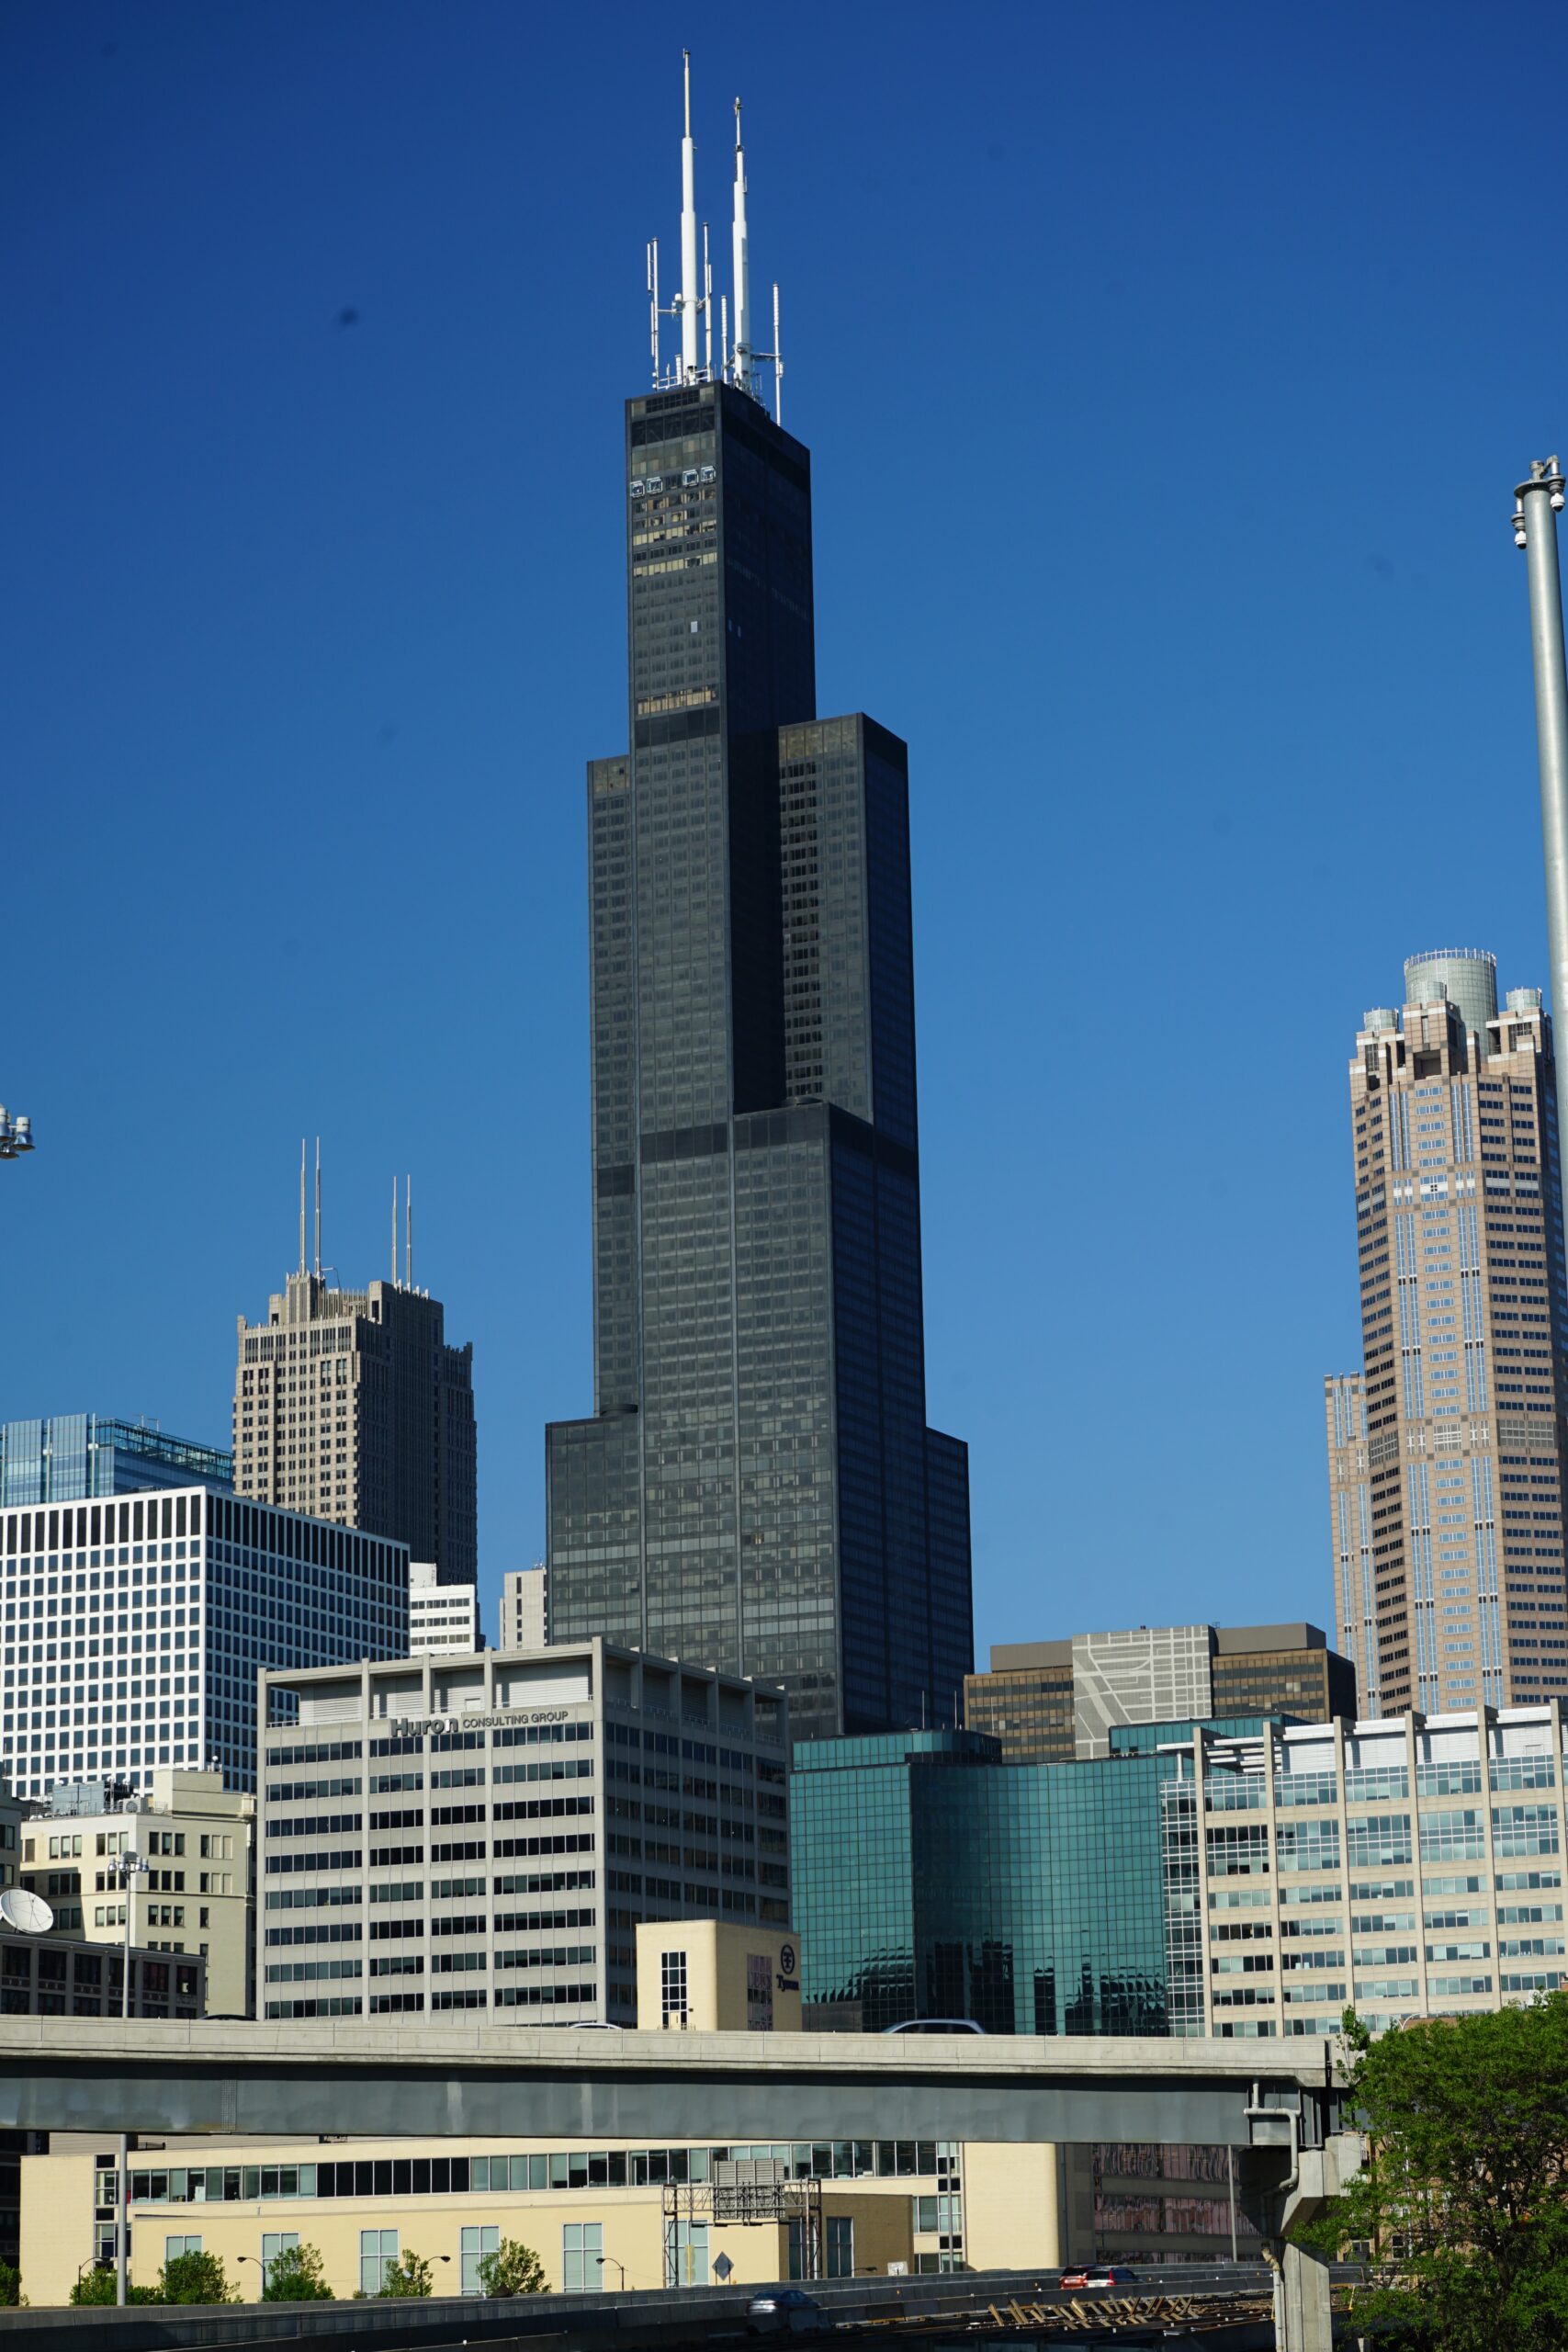 A daylight photo of Willis Tower in Chicago